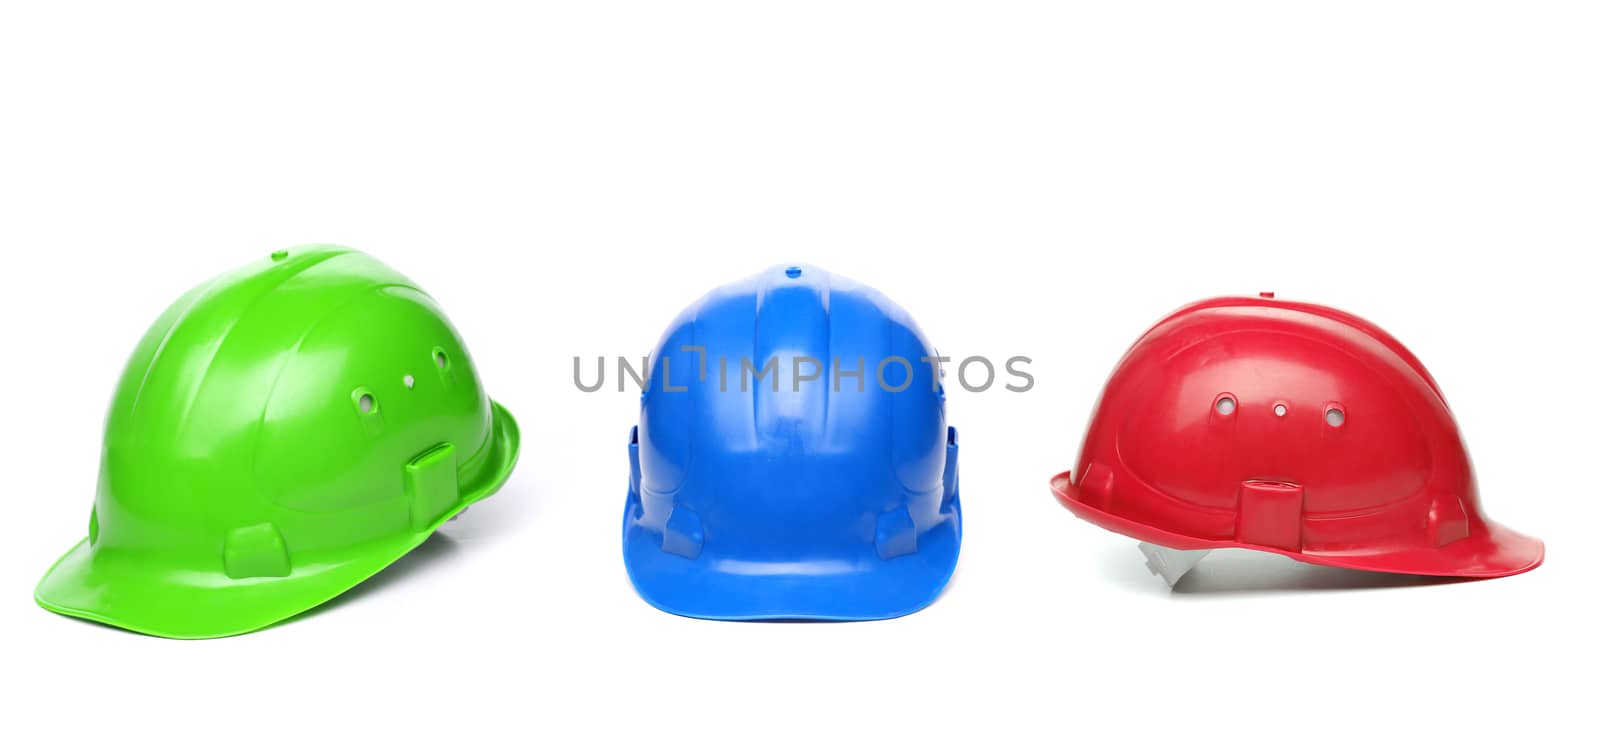 Blue, green, red hard hats isolated on a white background